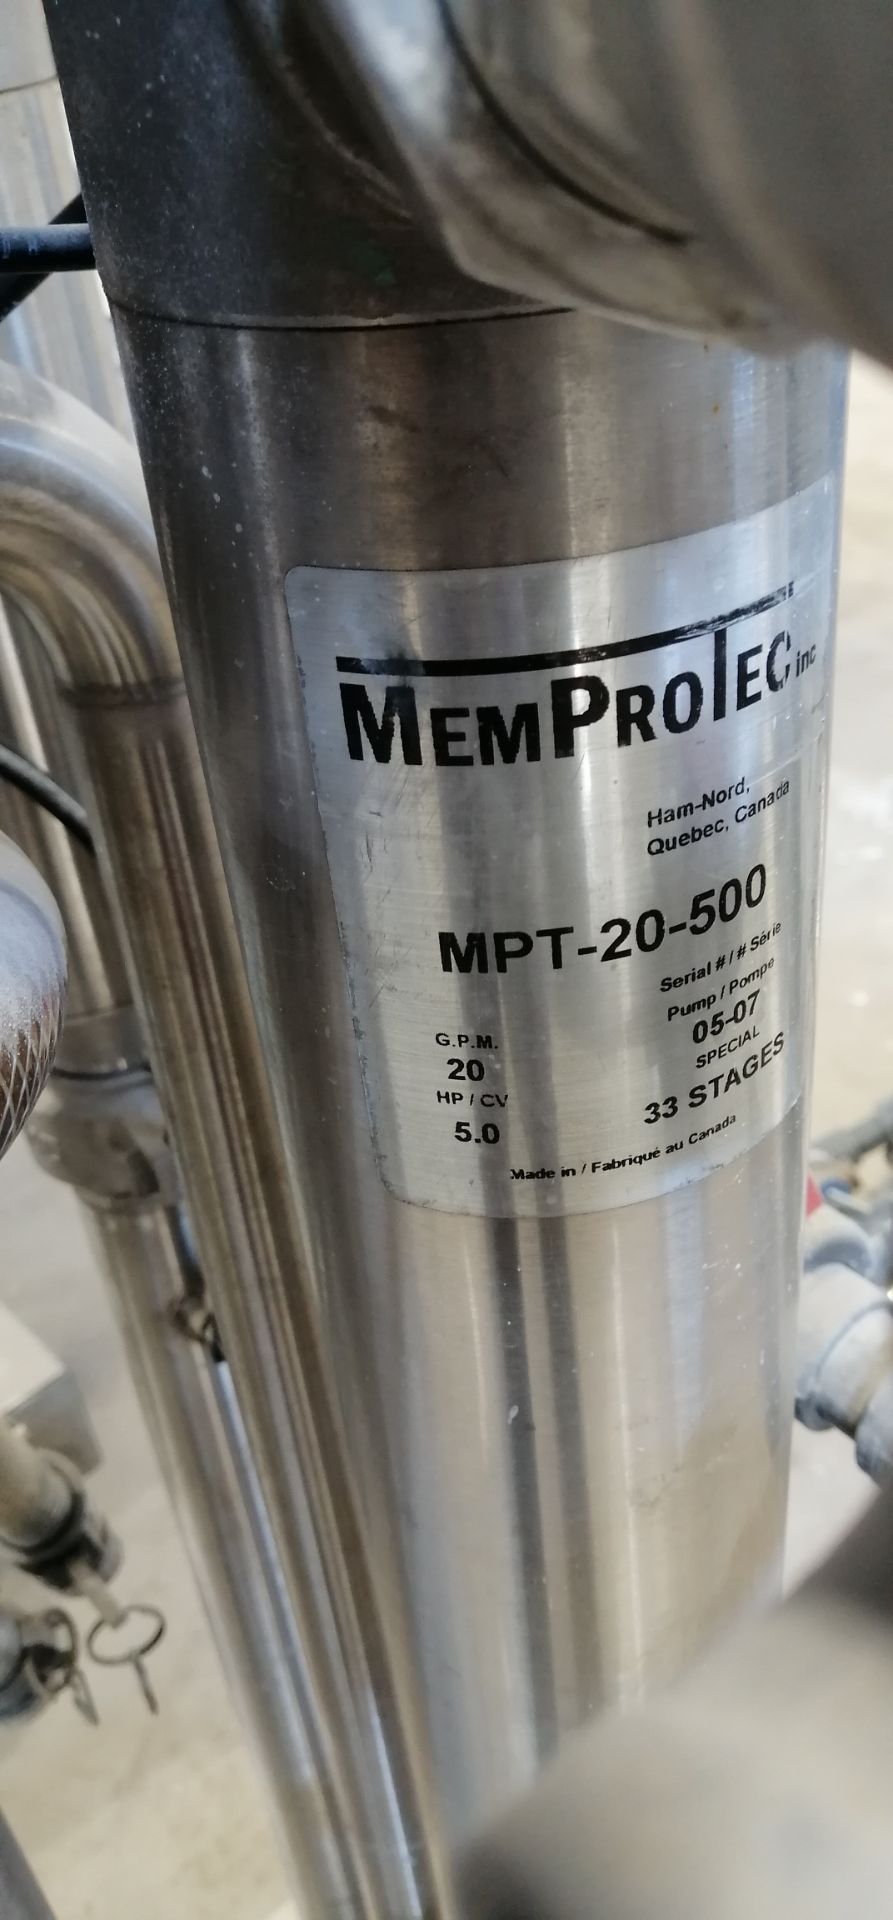 MemPro Series Stainless Steel Reverse osmosis or nanofiltration system Model:185-ROLP - Image 13 of 13